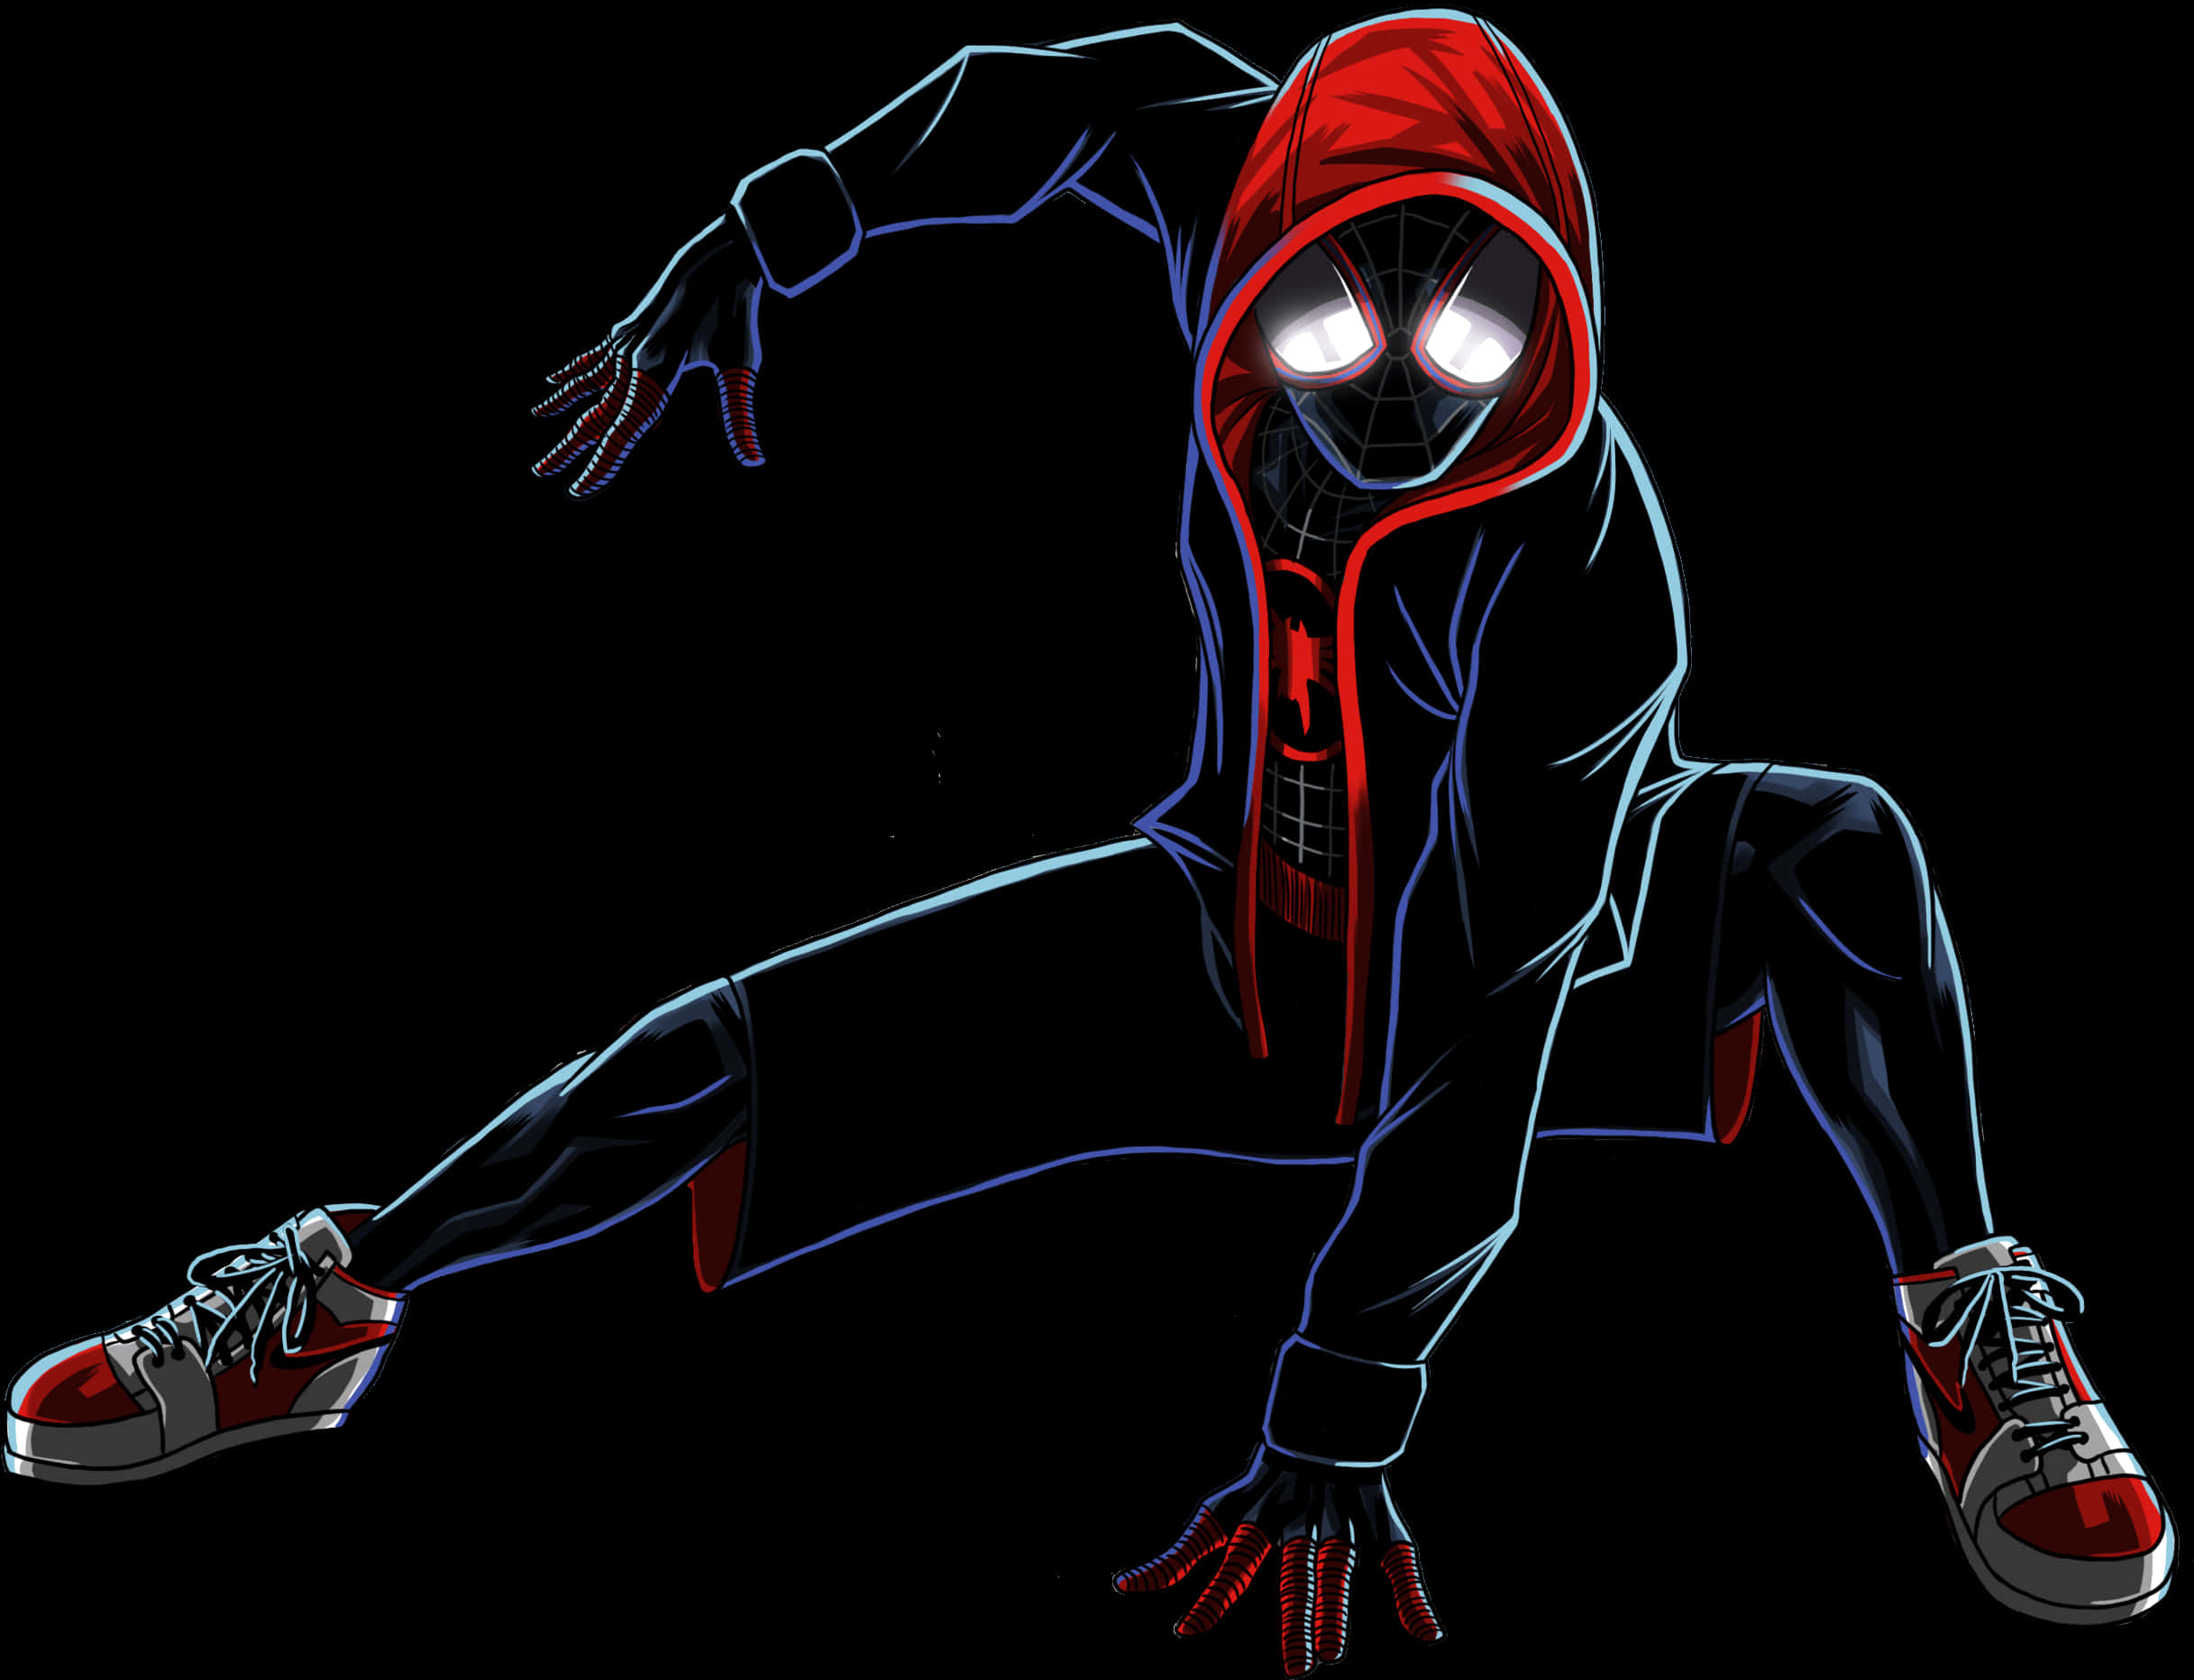 Download Miles Morales Spiderman Crouching Pose | Wallpapers.com